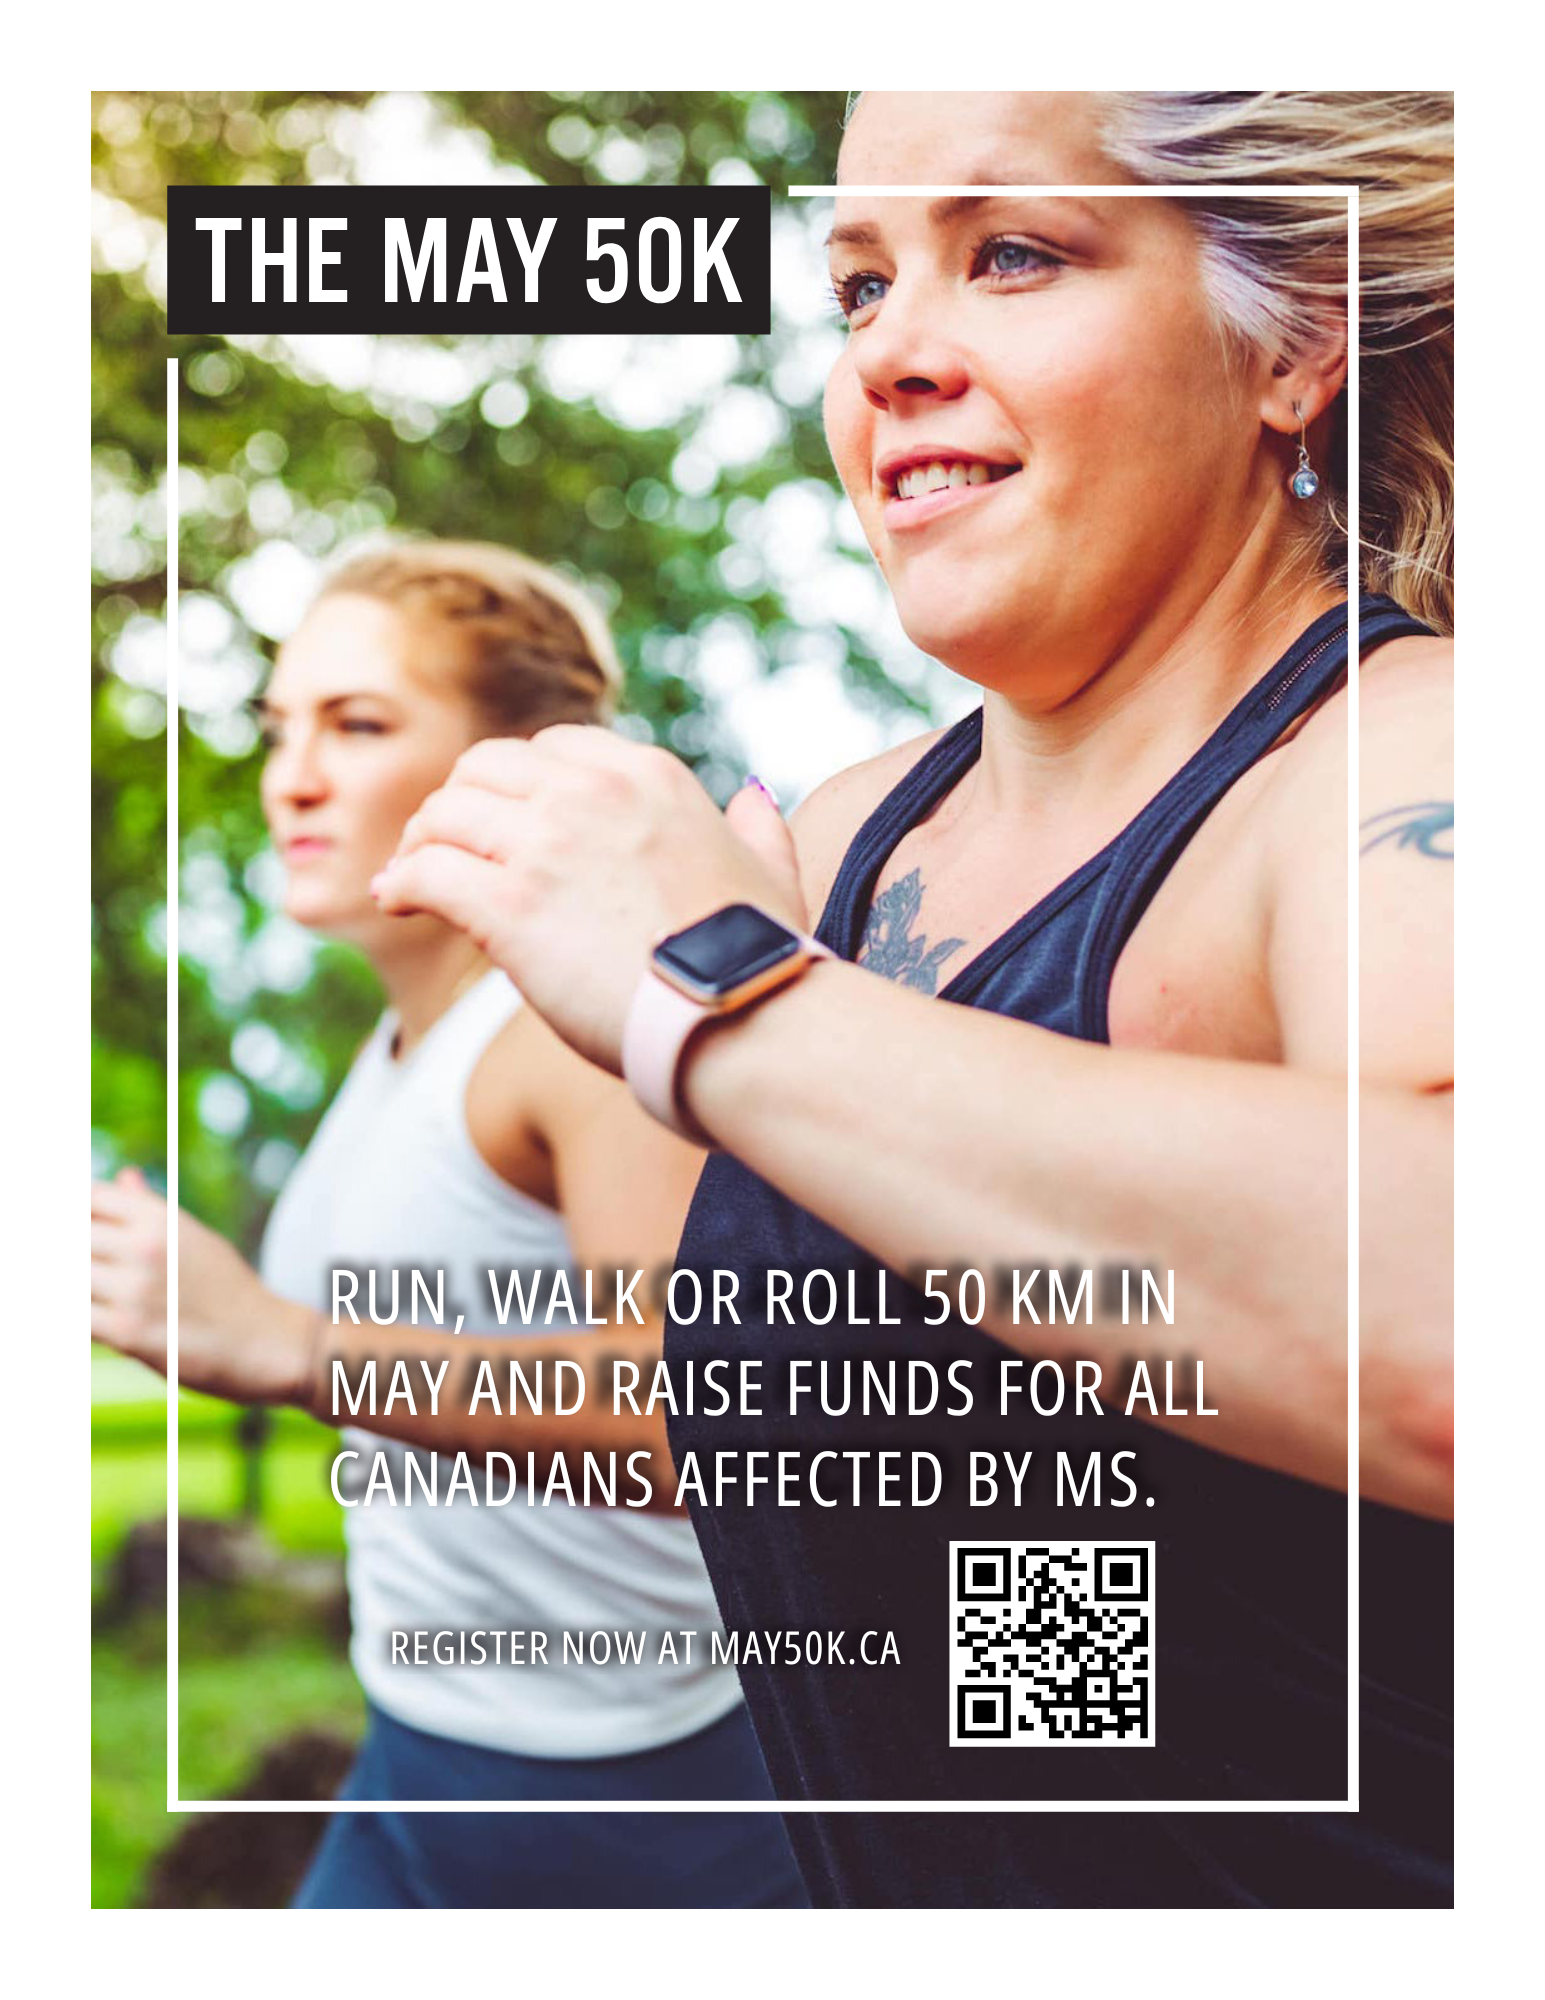 The May 50K/ Run, Walk or Roll 50KM in May and raise funds for all Canadians affected by MS